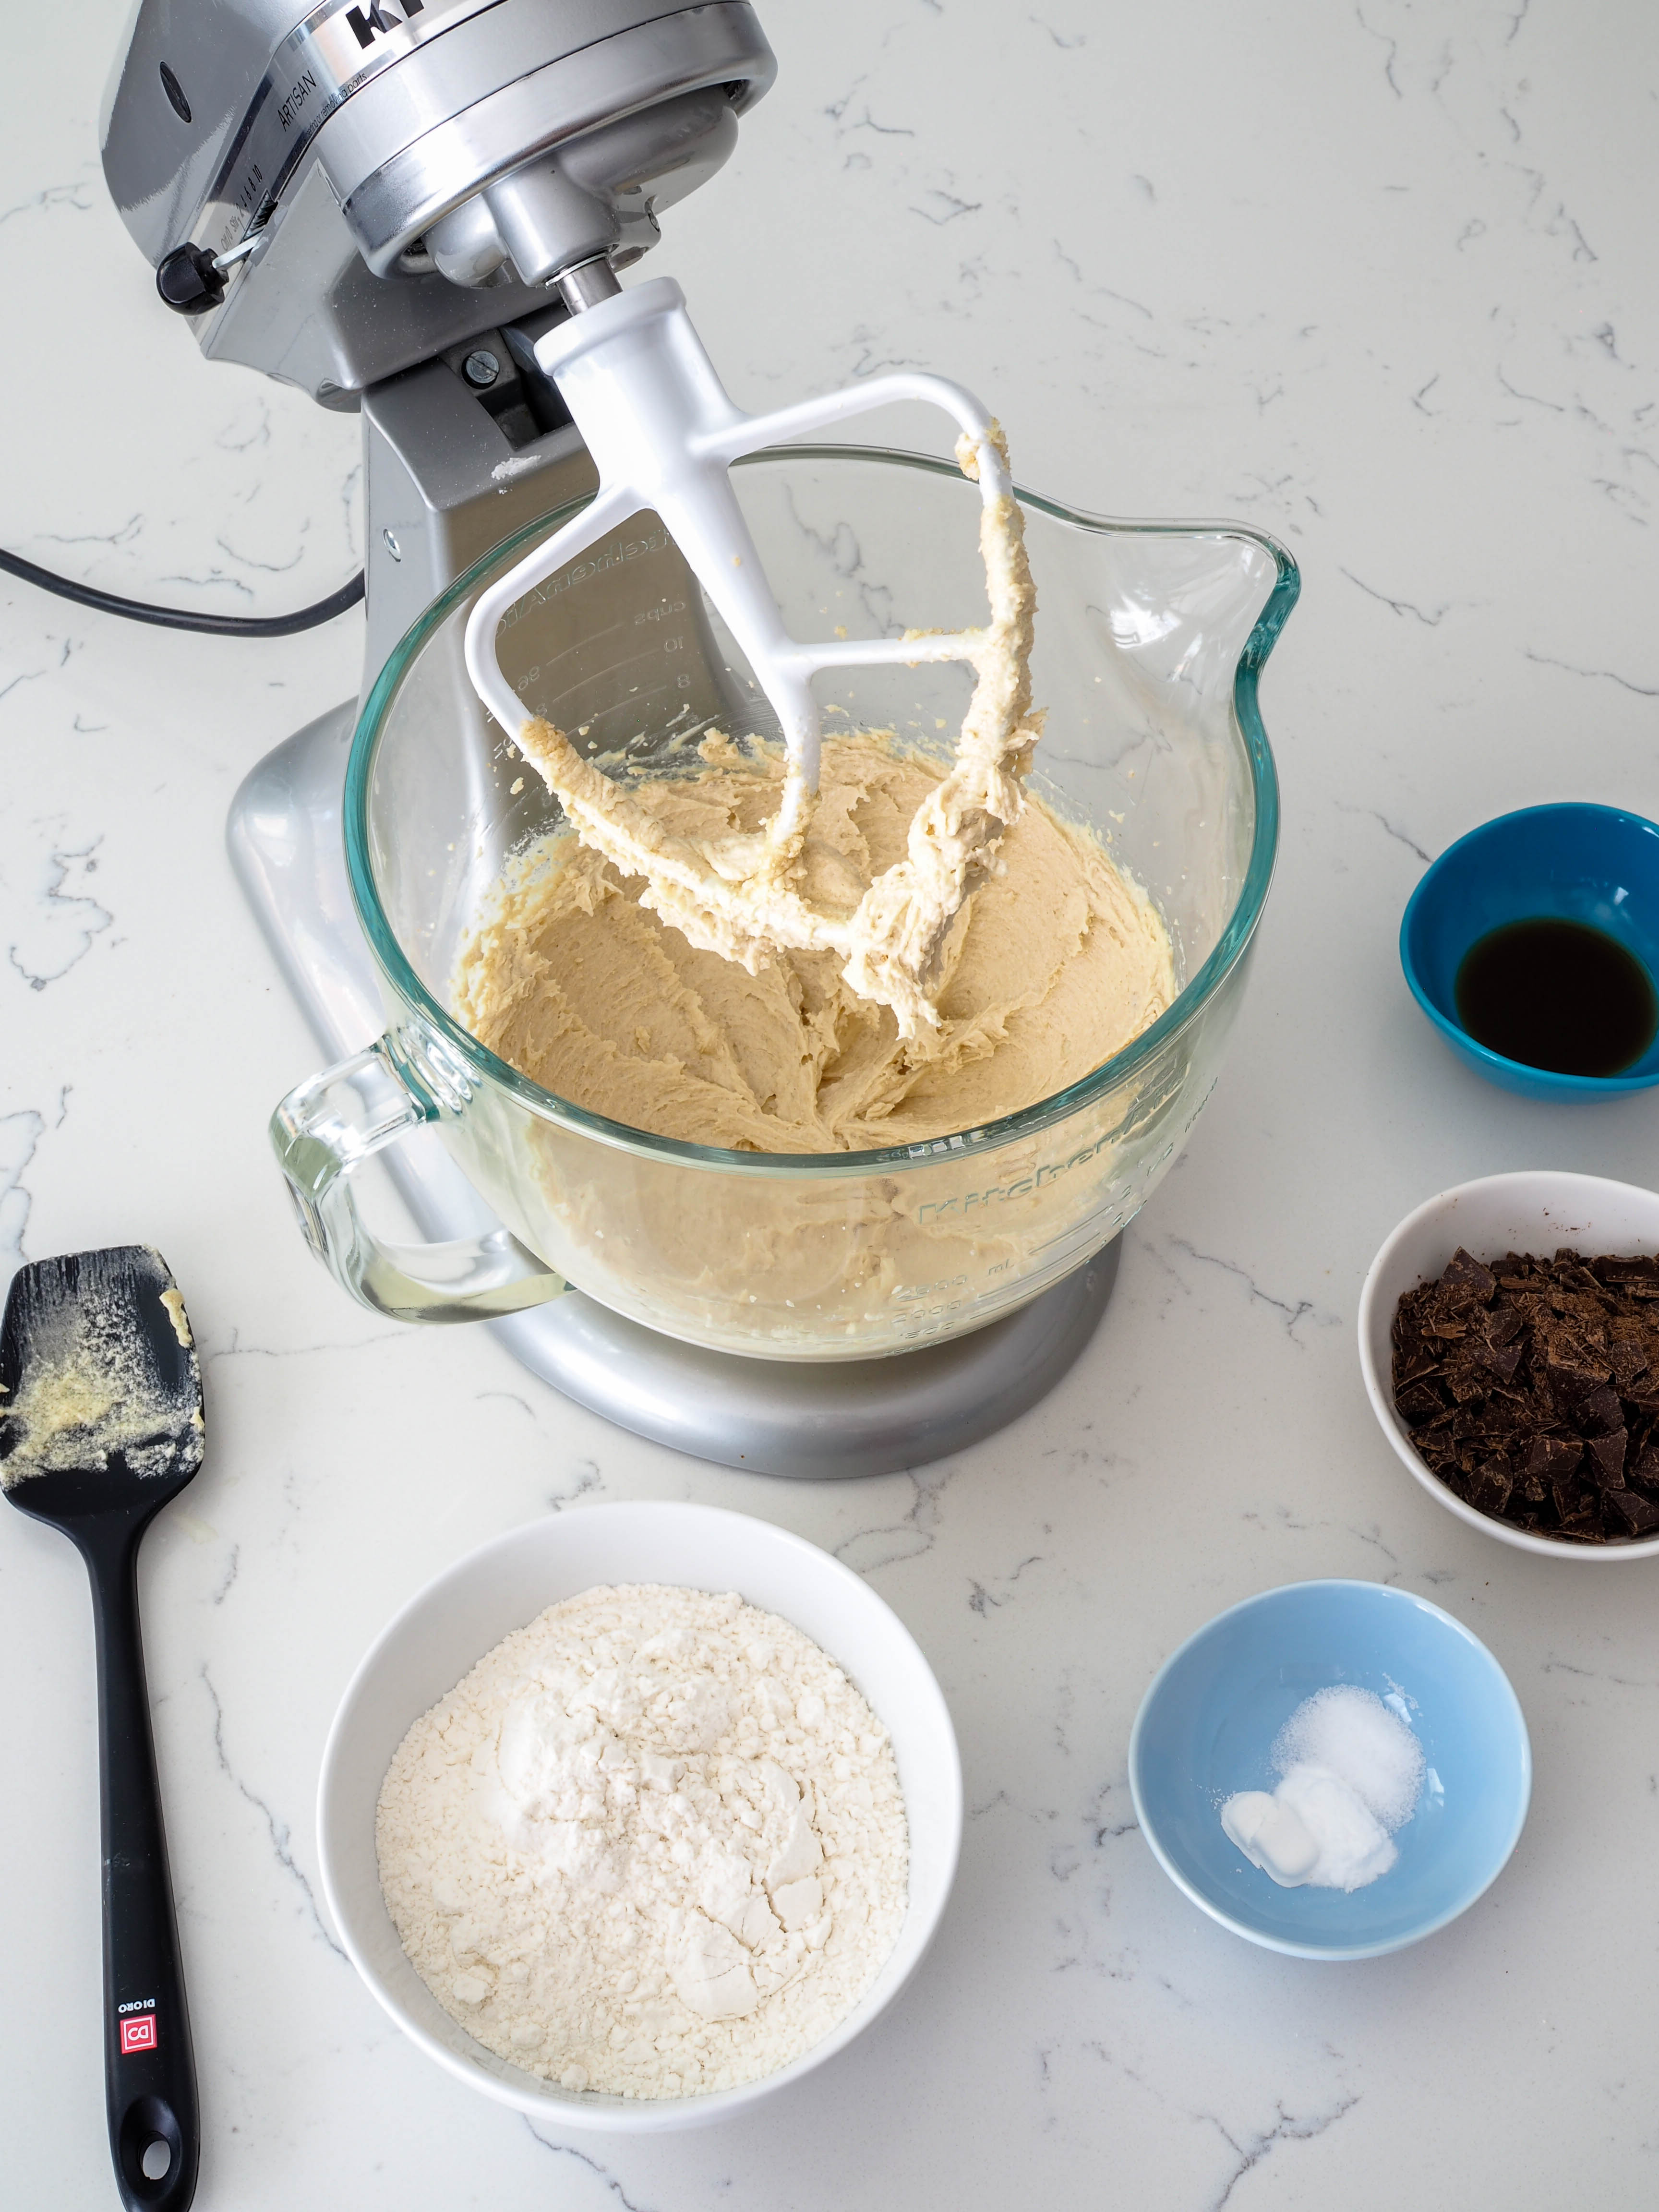 A bowl of cookie dough fitted in a stand mixer, just prior to adding the flour.